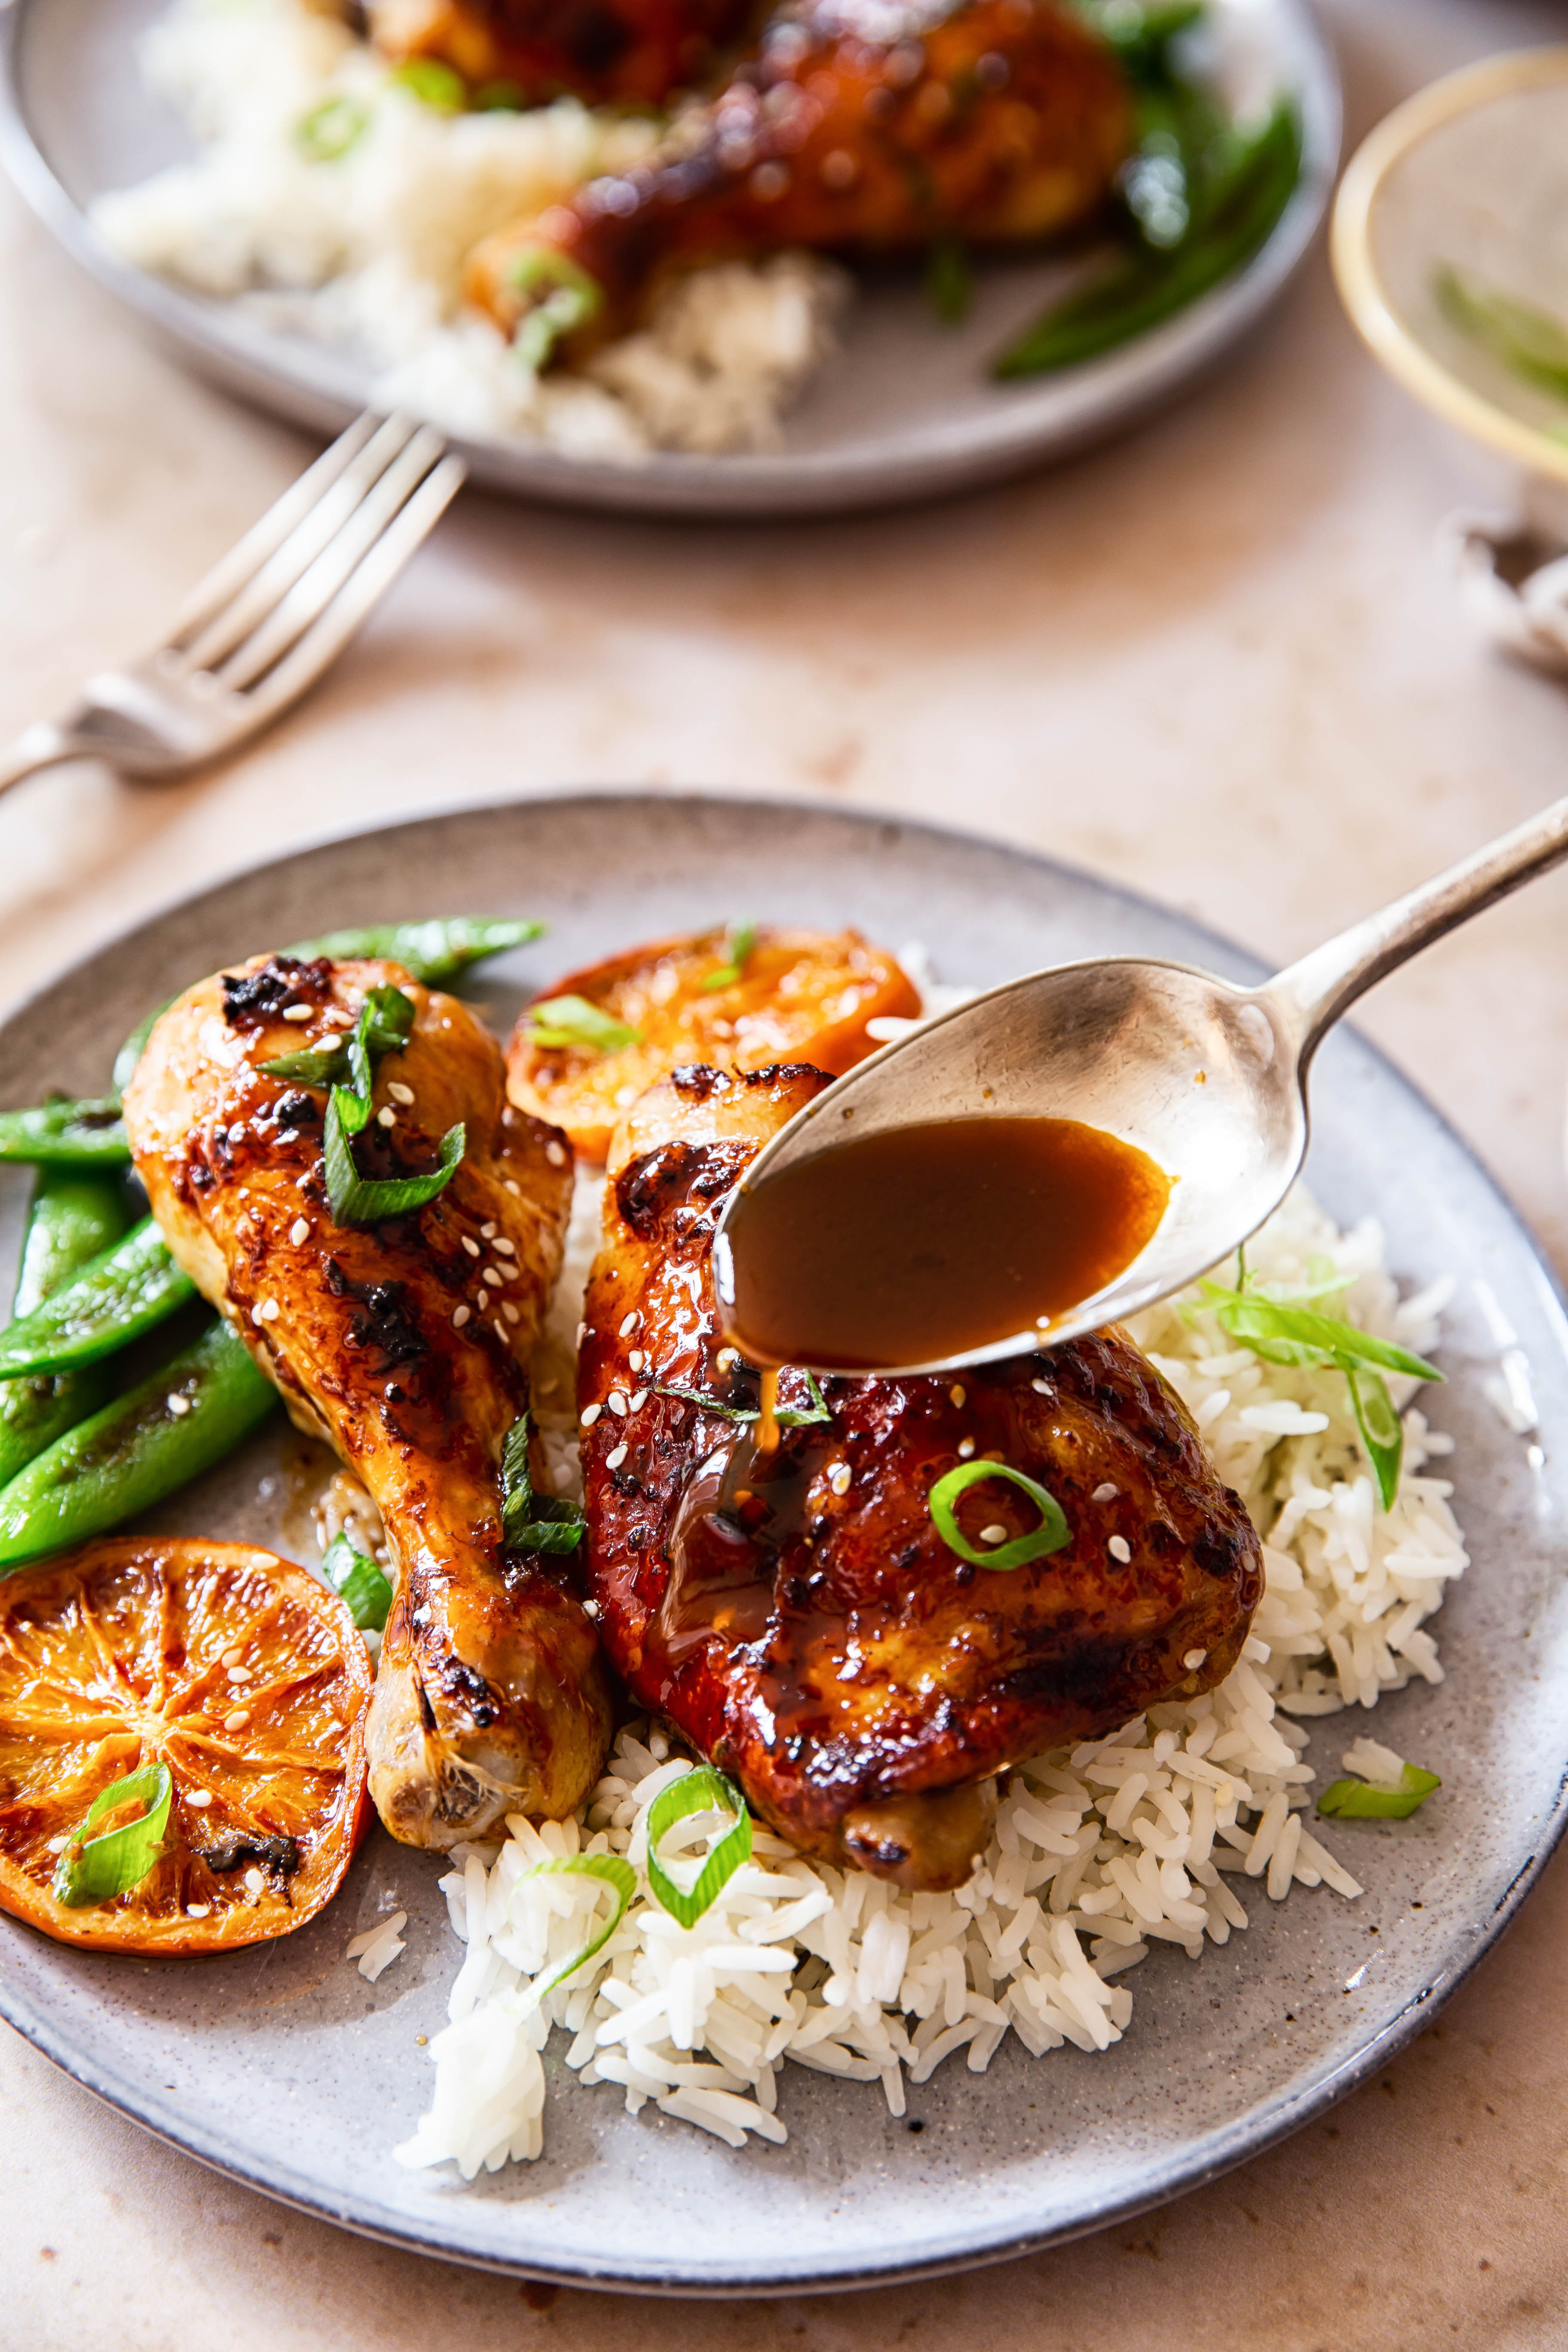 Honey Soy Chicken sprinkled with green onion and sesame seeds over white rice.